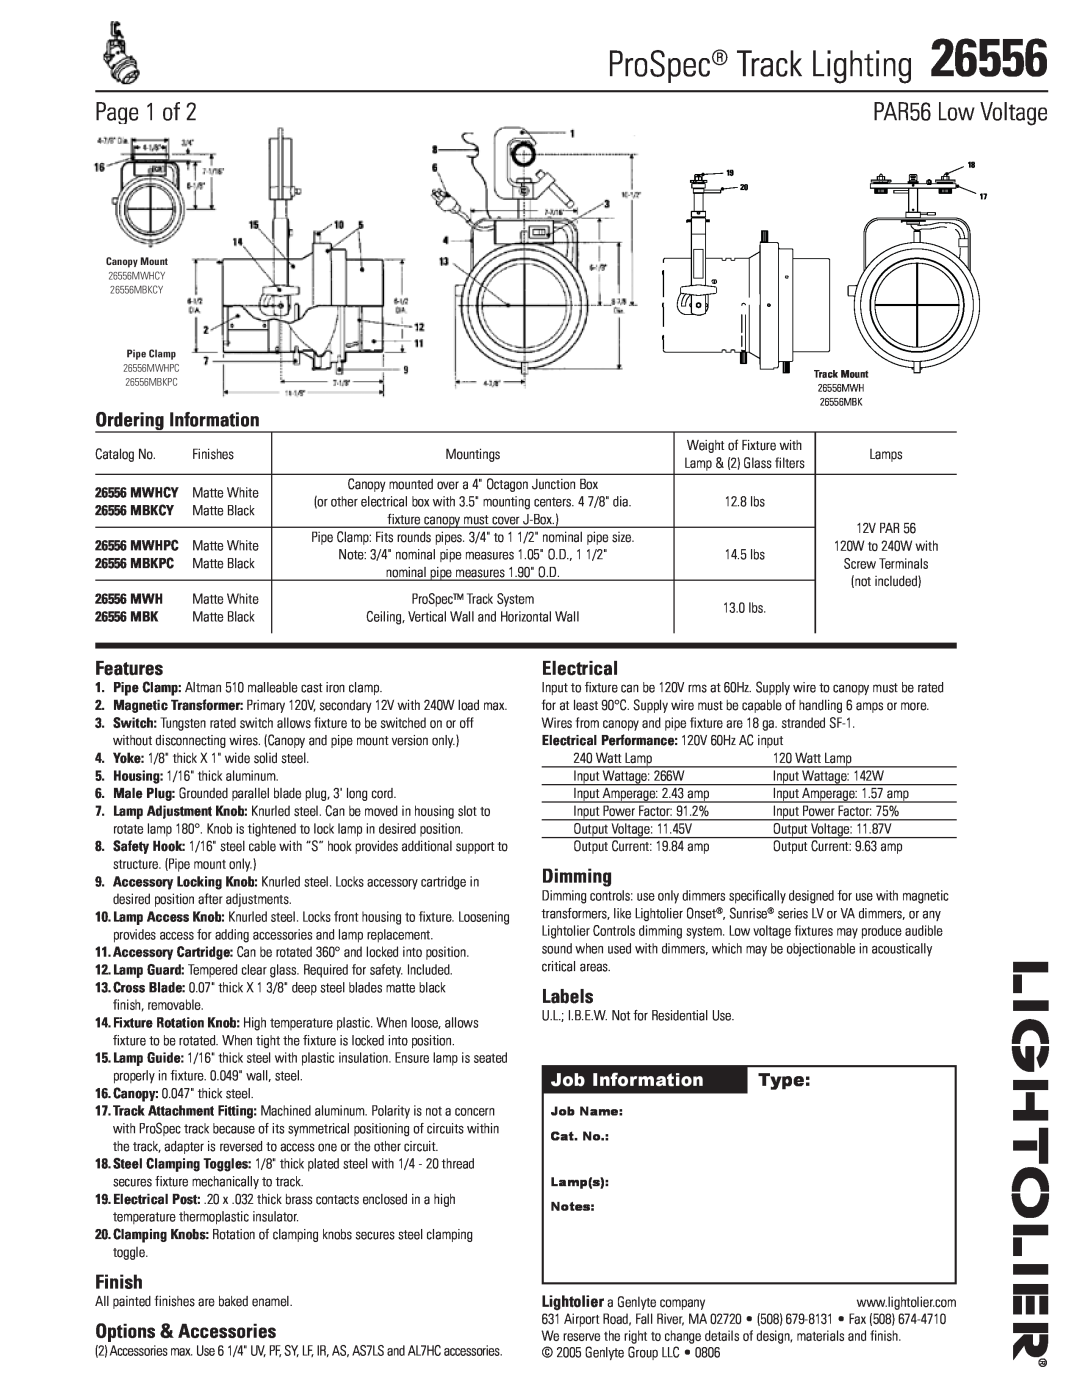 Lightolier 26556 manual Ordering Information, Features, Finish, Options & Accessories, Electrical, Dimming, Labels, Type 